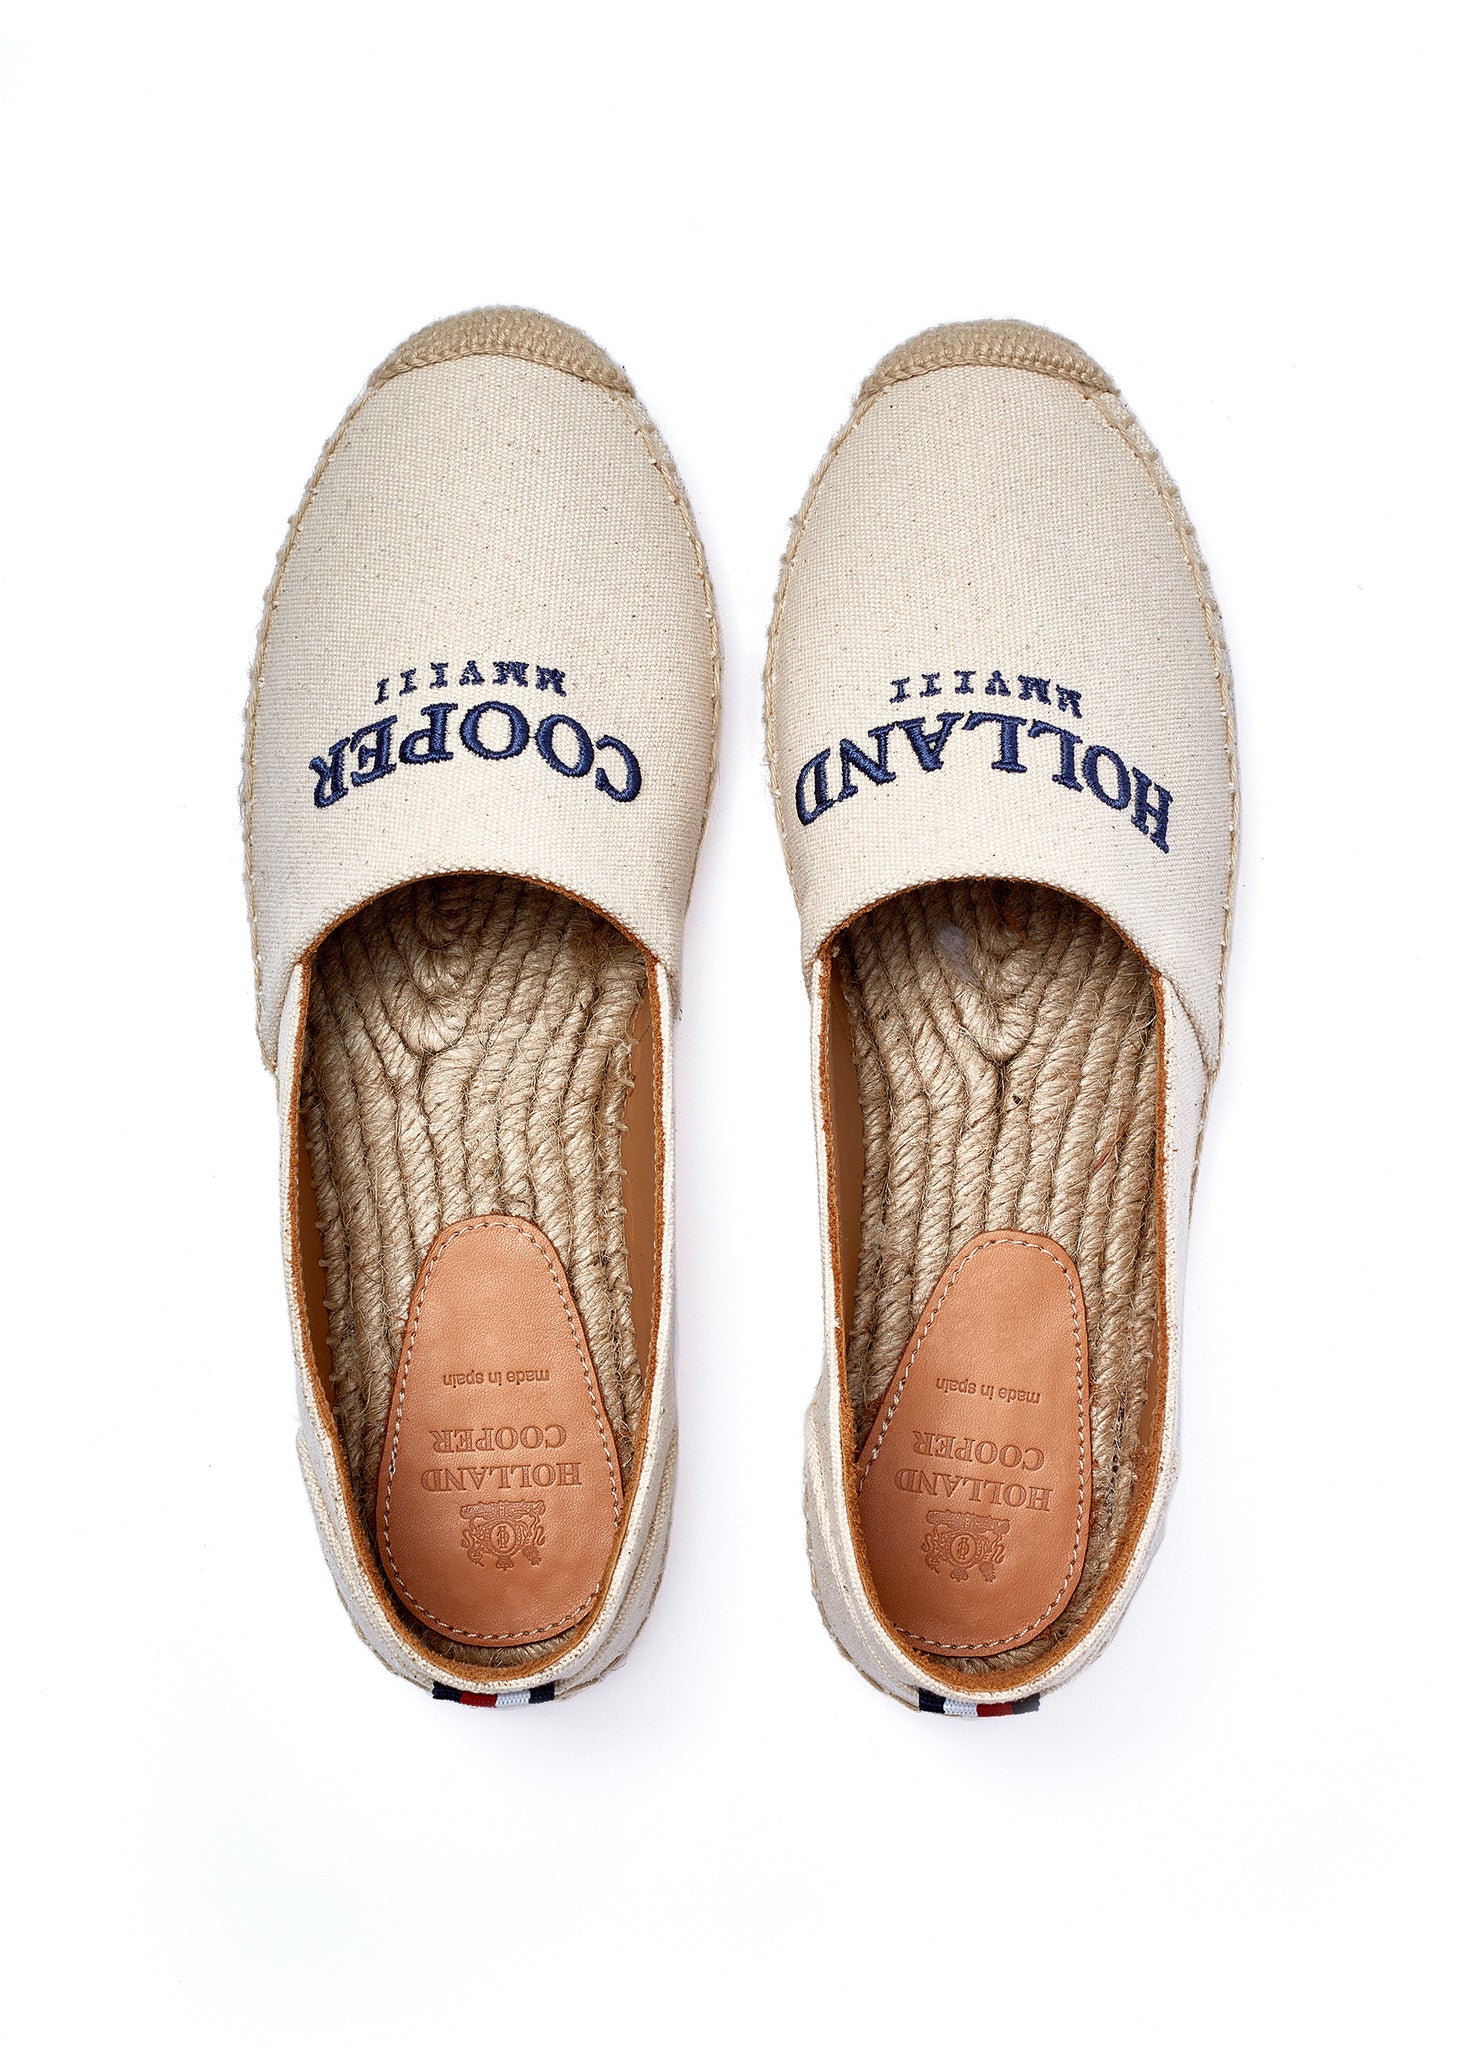 Birds eye view of classic style natural canvas espadrille with plaited jute sole and jute toe cap with navy embroidered branding on top and a red, white and blue small tag on the heel